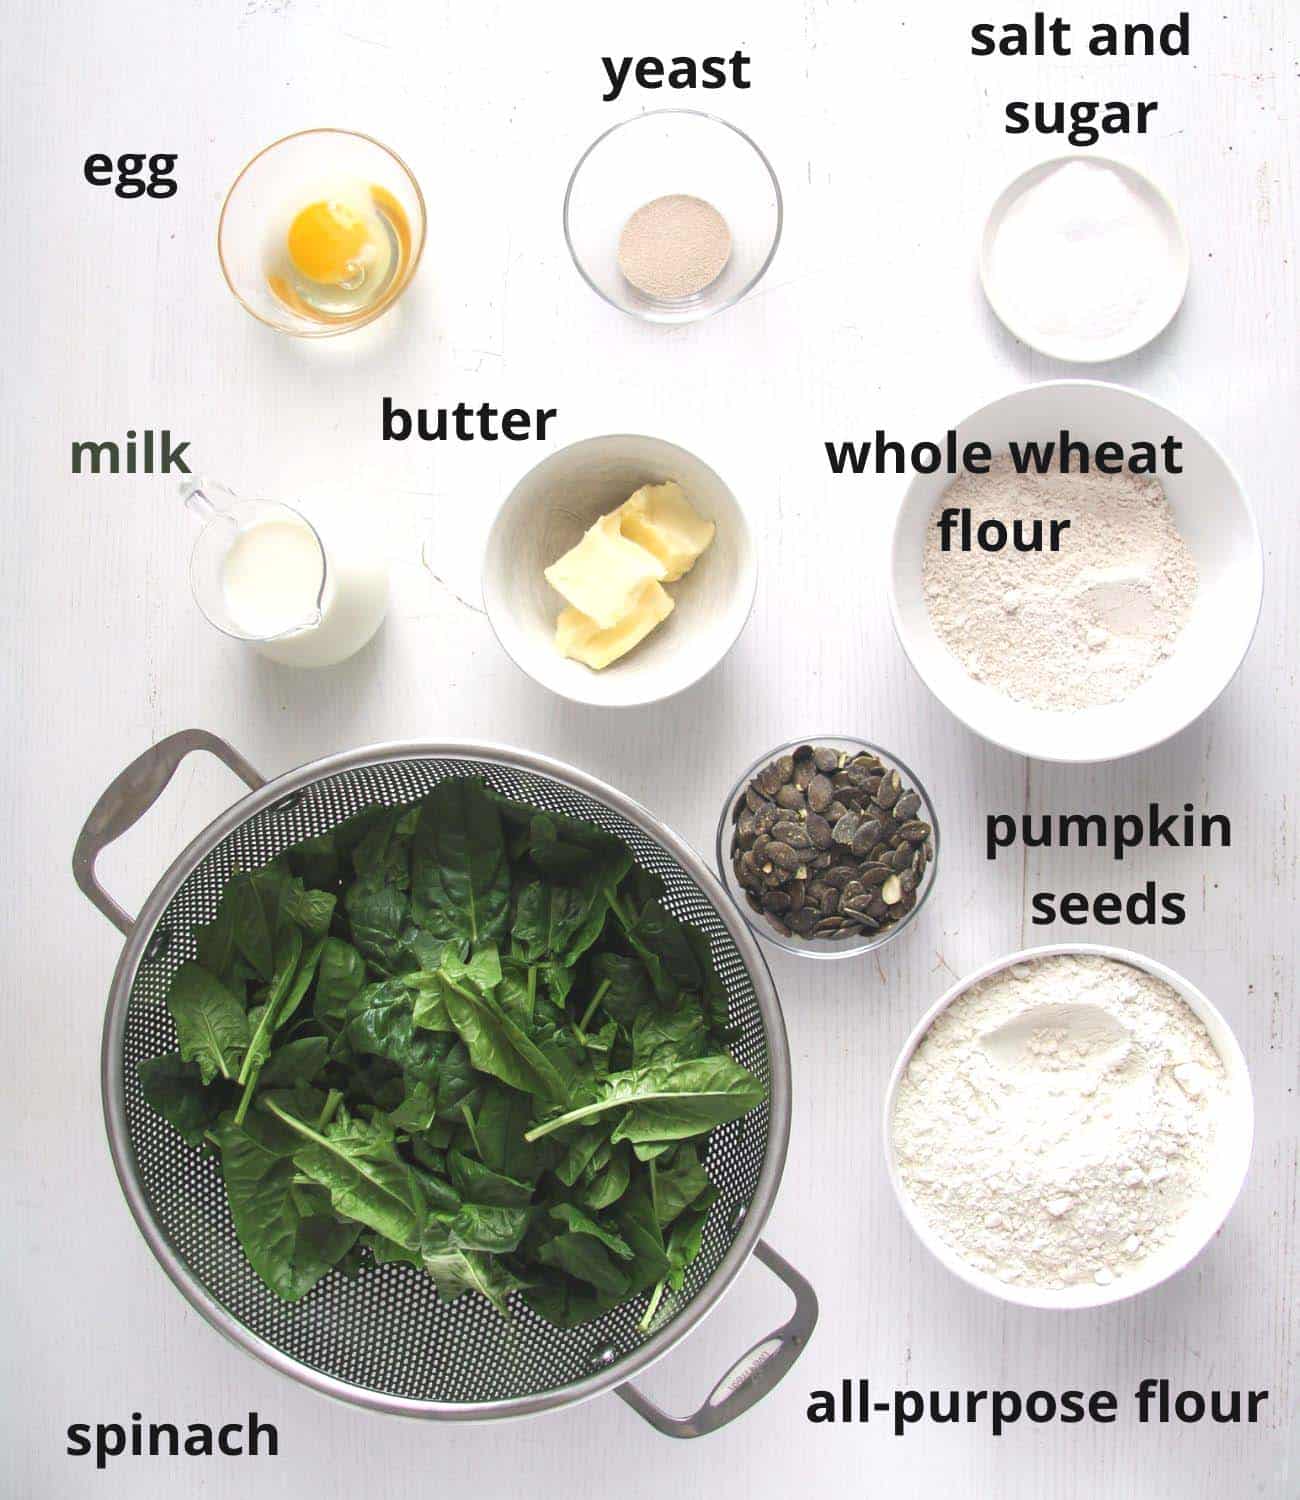 ingredients for spinach bread in bowls.